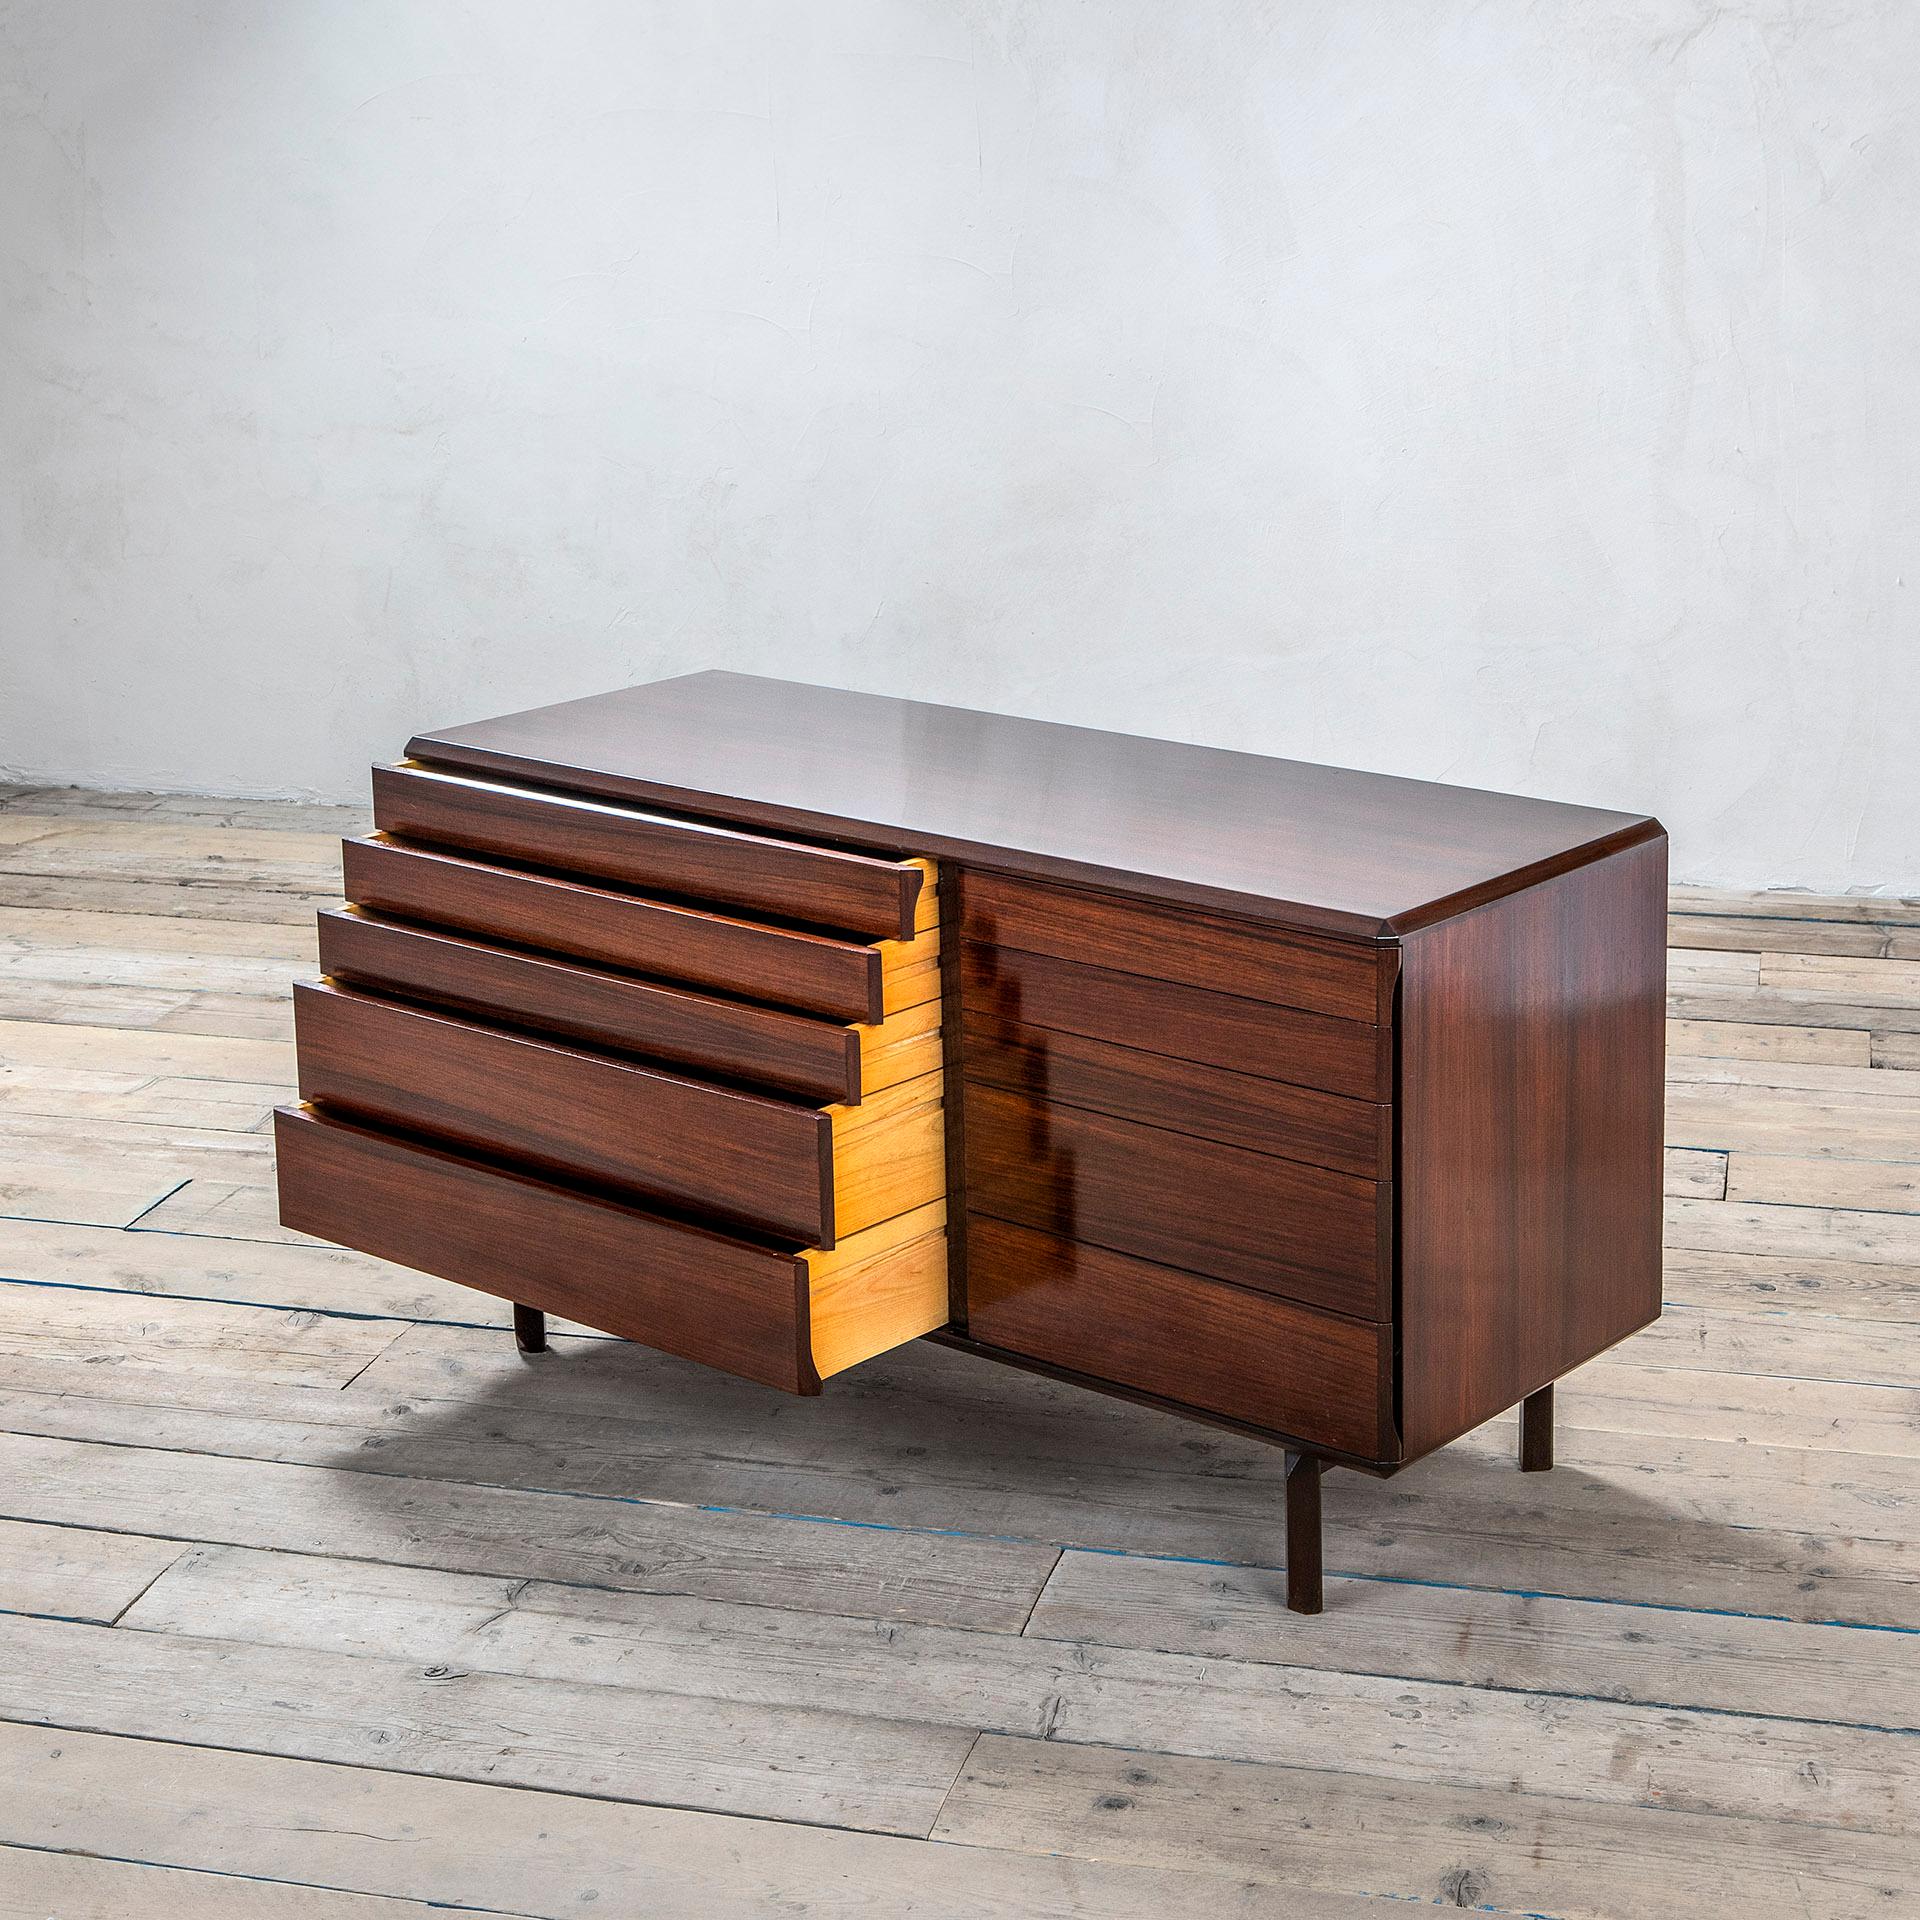 Cabinet designed in 1950s in the style of Ico Parisi. The cabinet is totally in wood and has 10 drawers. The rectangular shape of the furniture is made more elegant thanks to a cut all along the corners that should be at 90 degrees, but are actually